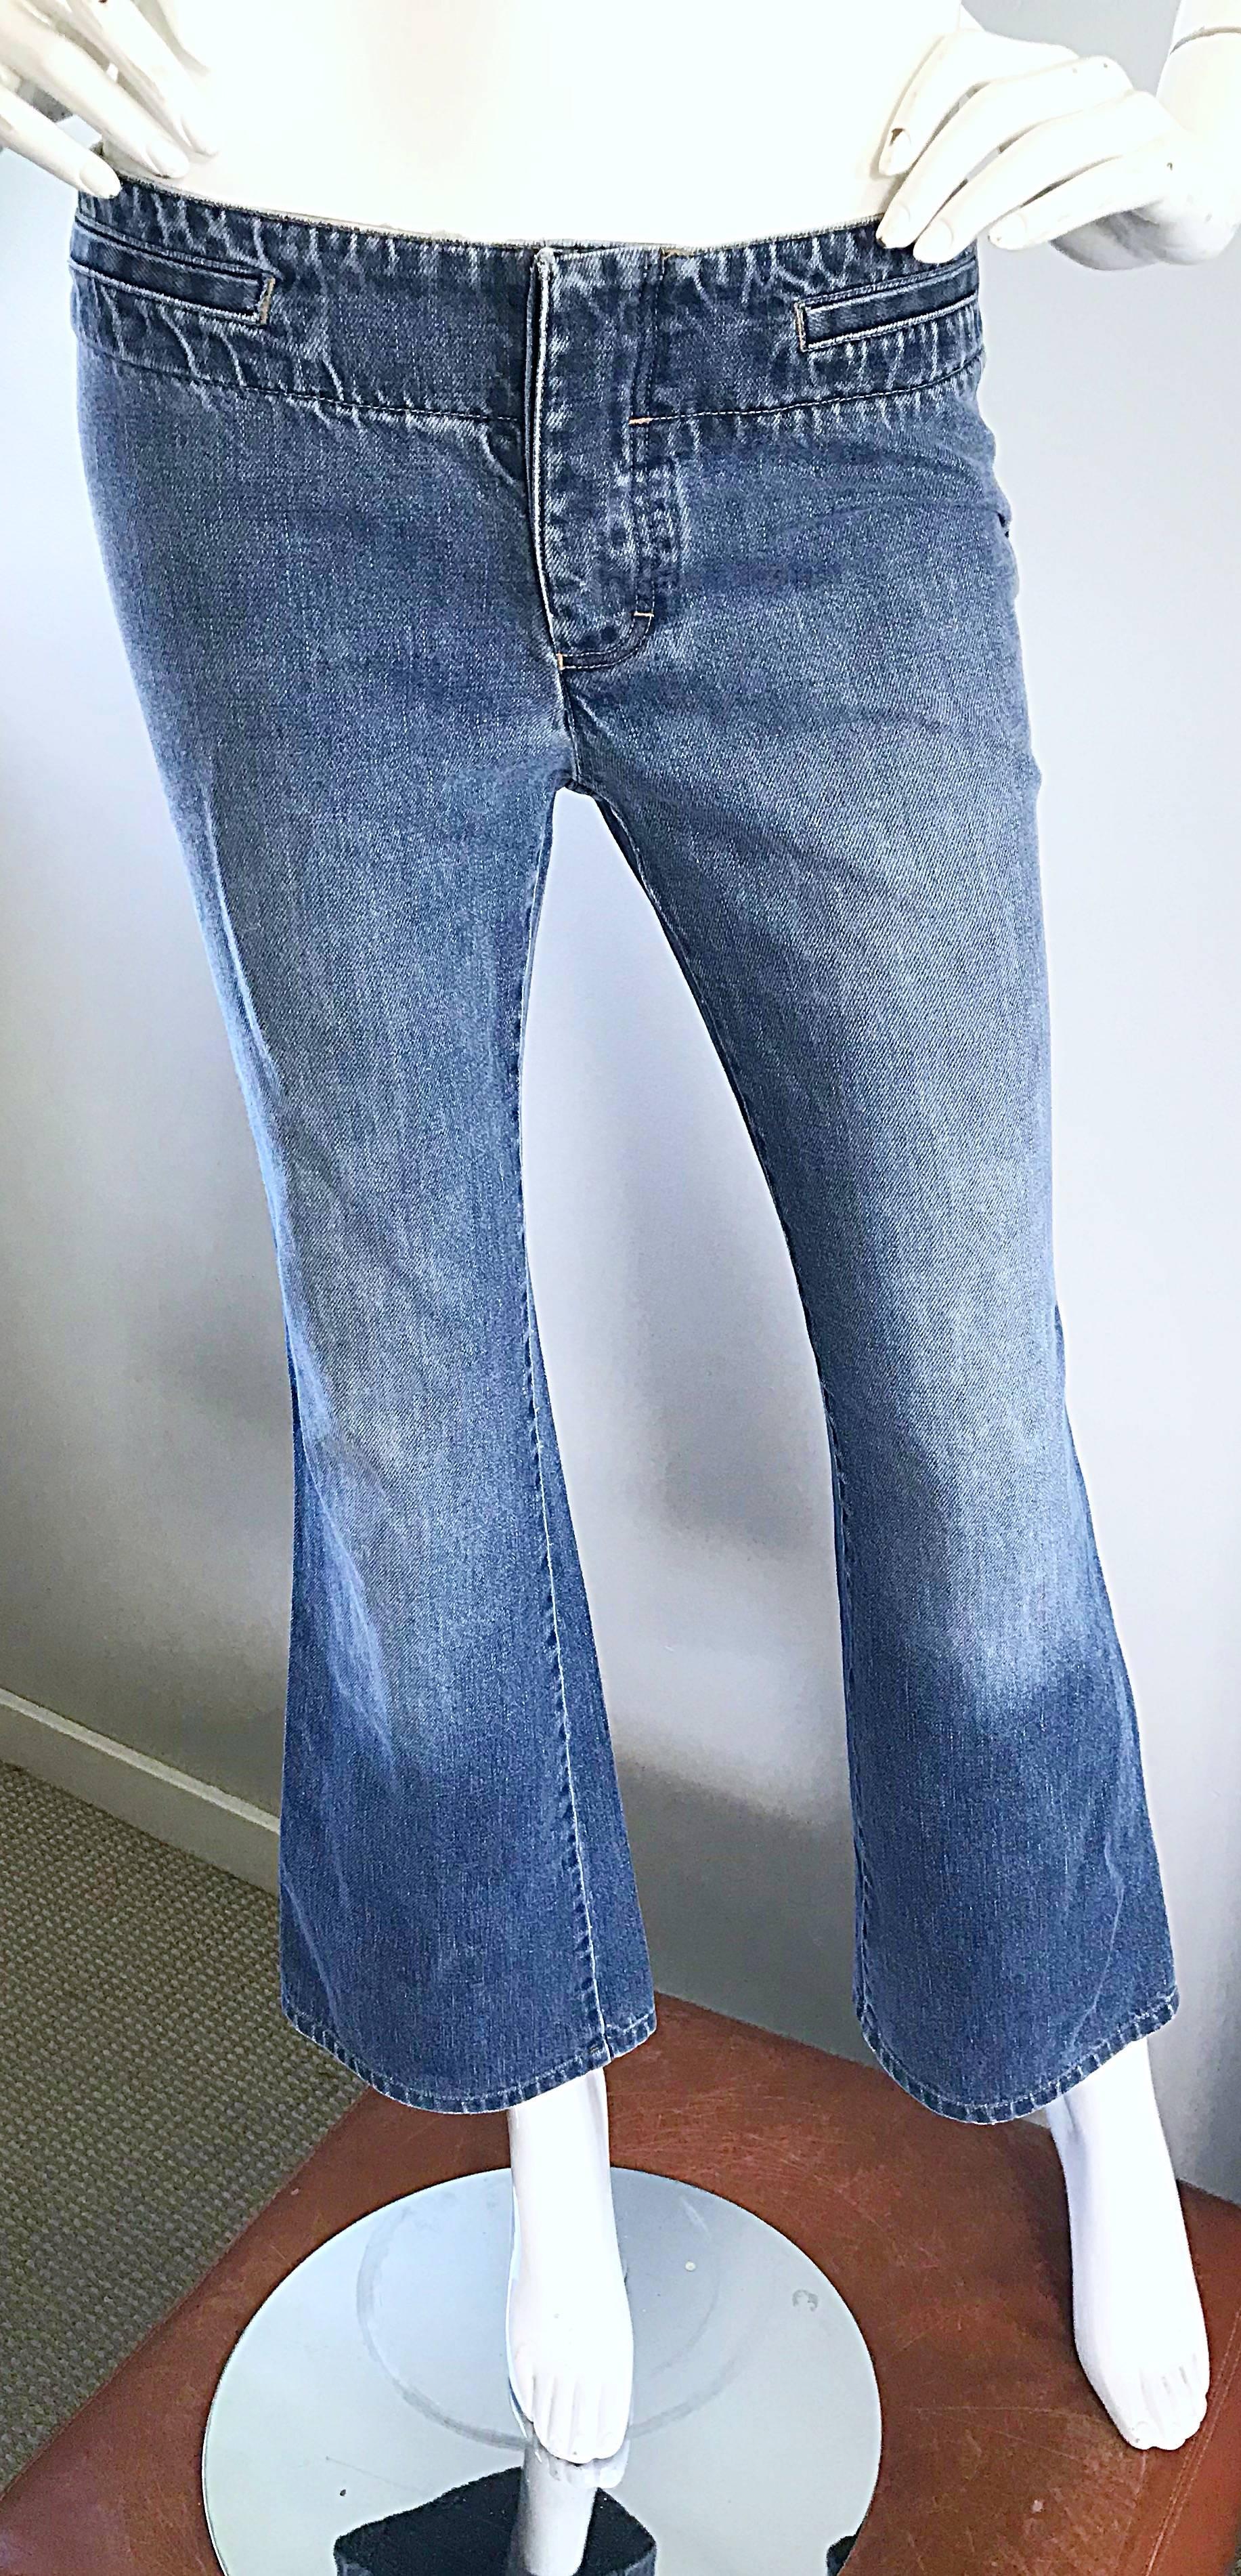 Tom Ford for Gucci Size 6 Low Rise Blue Jeans Denim Flare Leg 